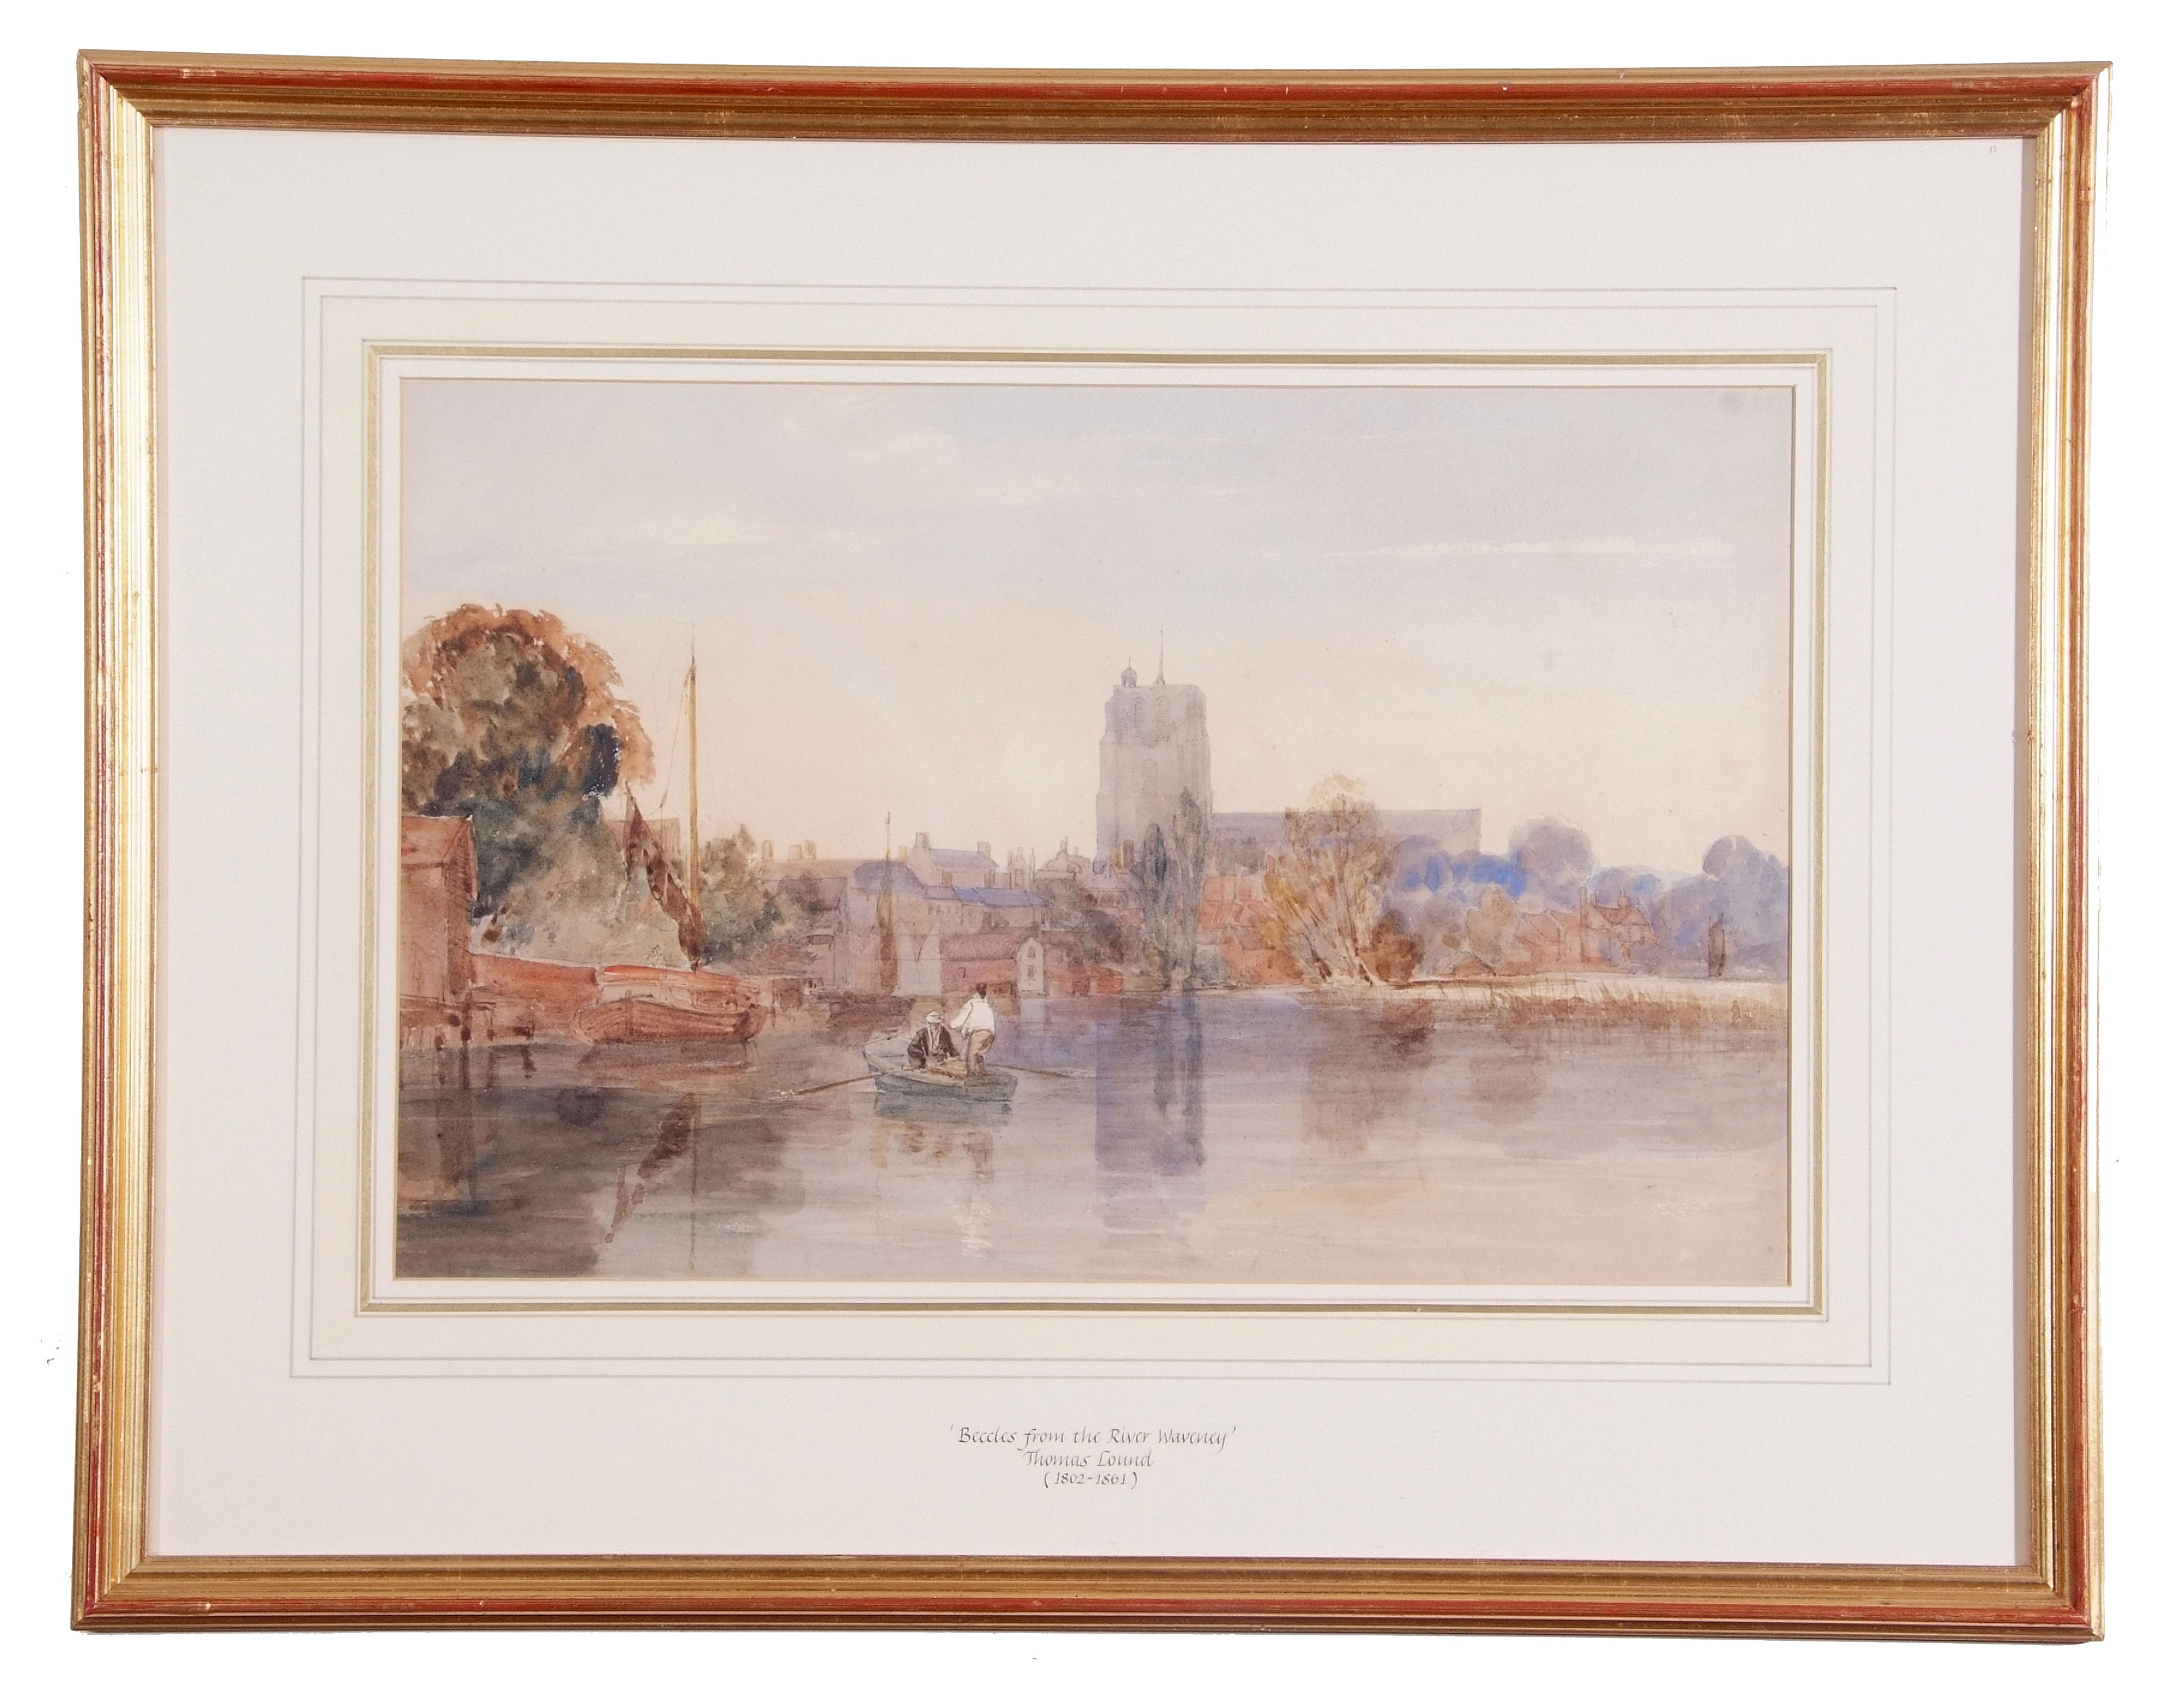 Thomas Lound (British, 1802-1861), Beccles from the River Waveney, Watercolour. 11x16.5ins - Image 2 of 2